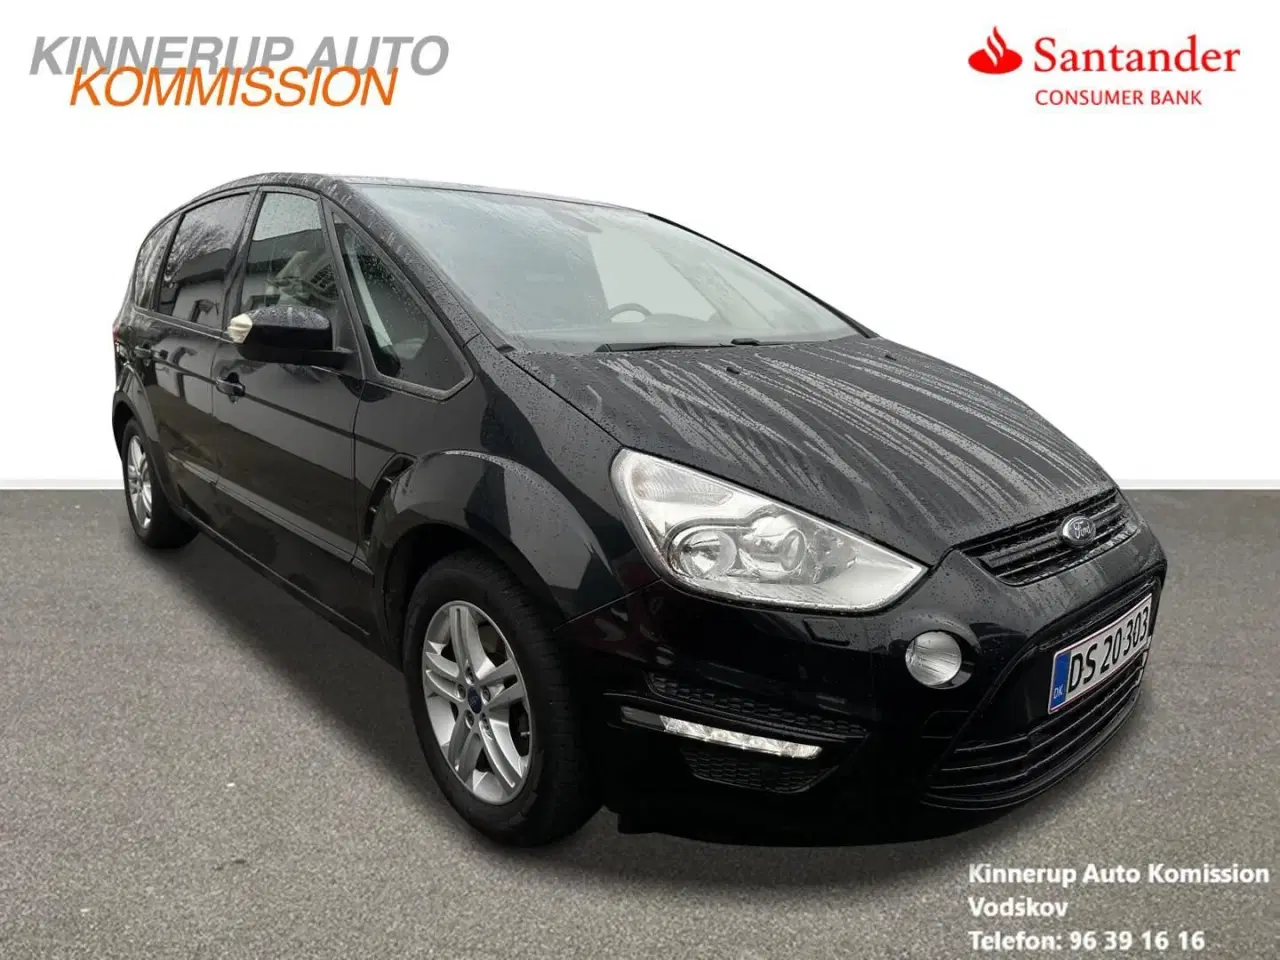 Billede 2 - Ford S-Max 2,0 TDCi Collection Powershift 140HK 6g Aut.